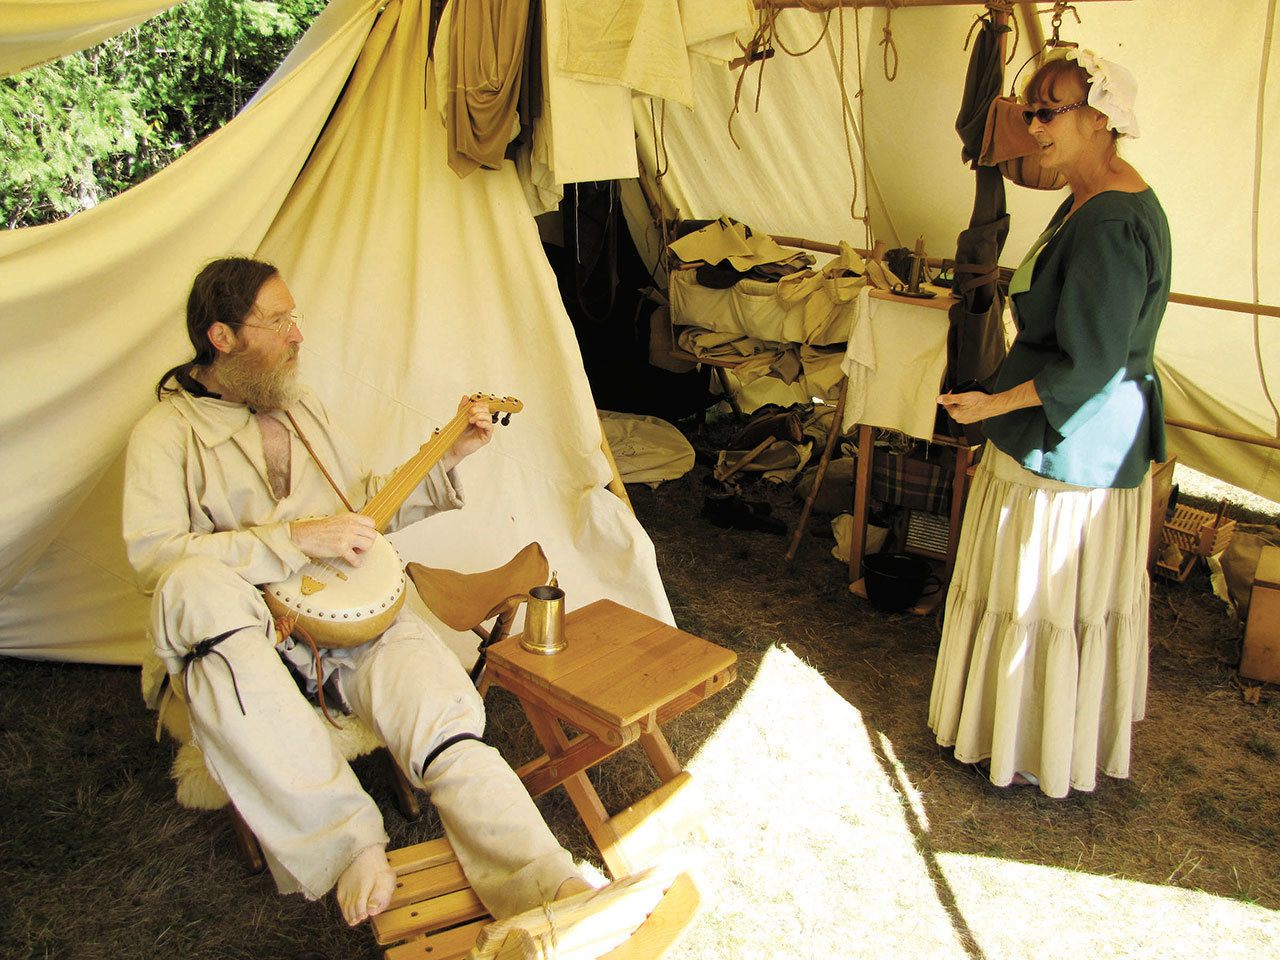 Donna Helgeson of Sedro-Woolley, right, visits with her tent neighbor, Eric J. Sisk of Seattle, at the Green River Mountain Men’s annual rendezvous in 2013. (Peninsula Daily News)